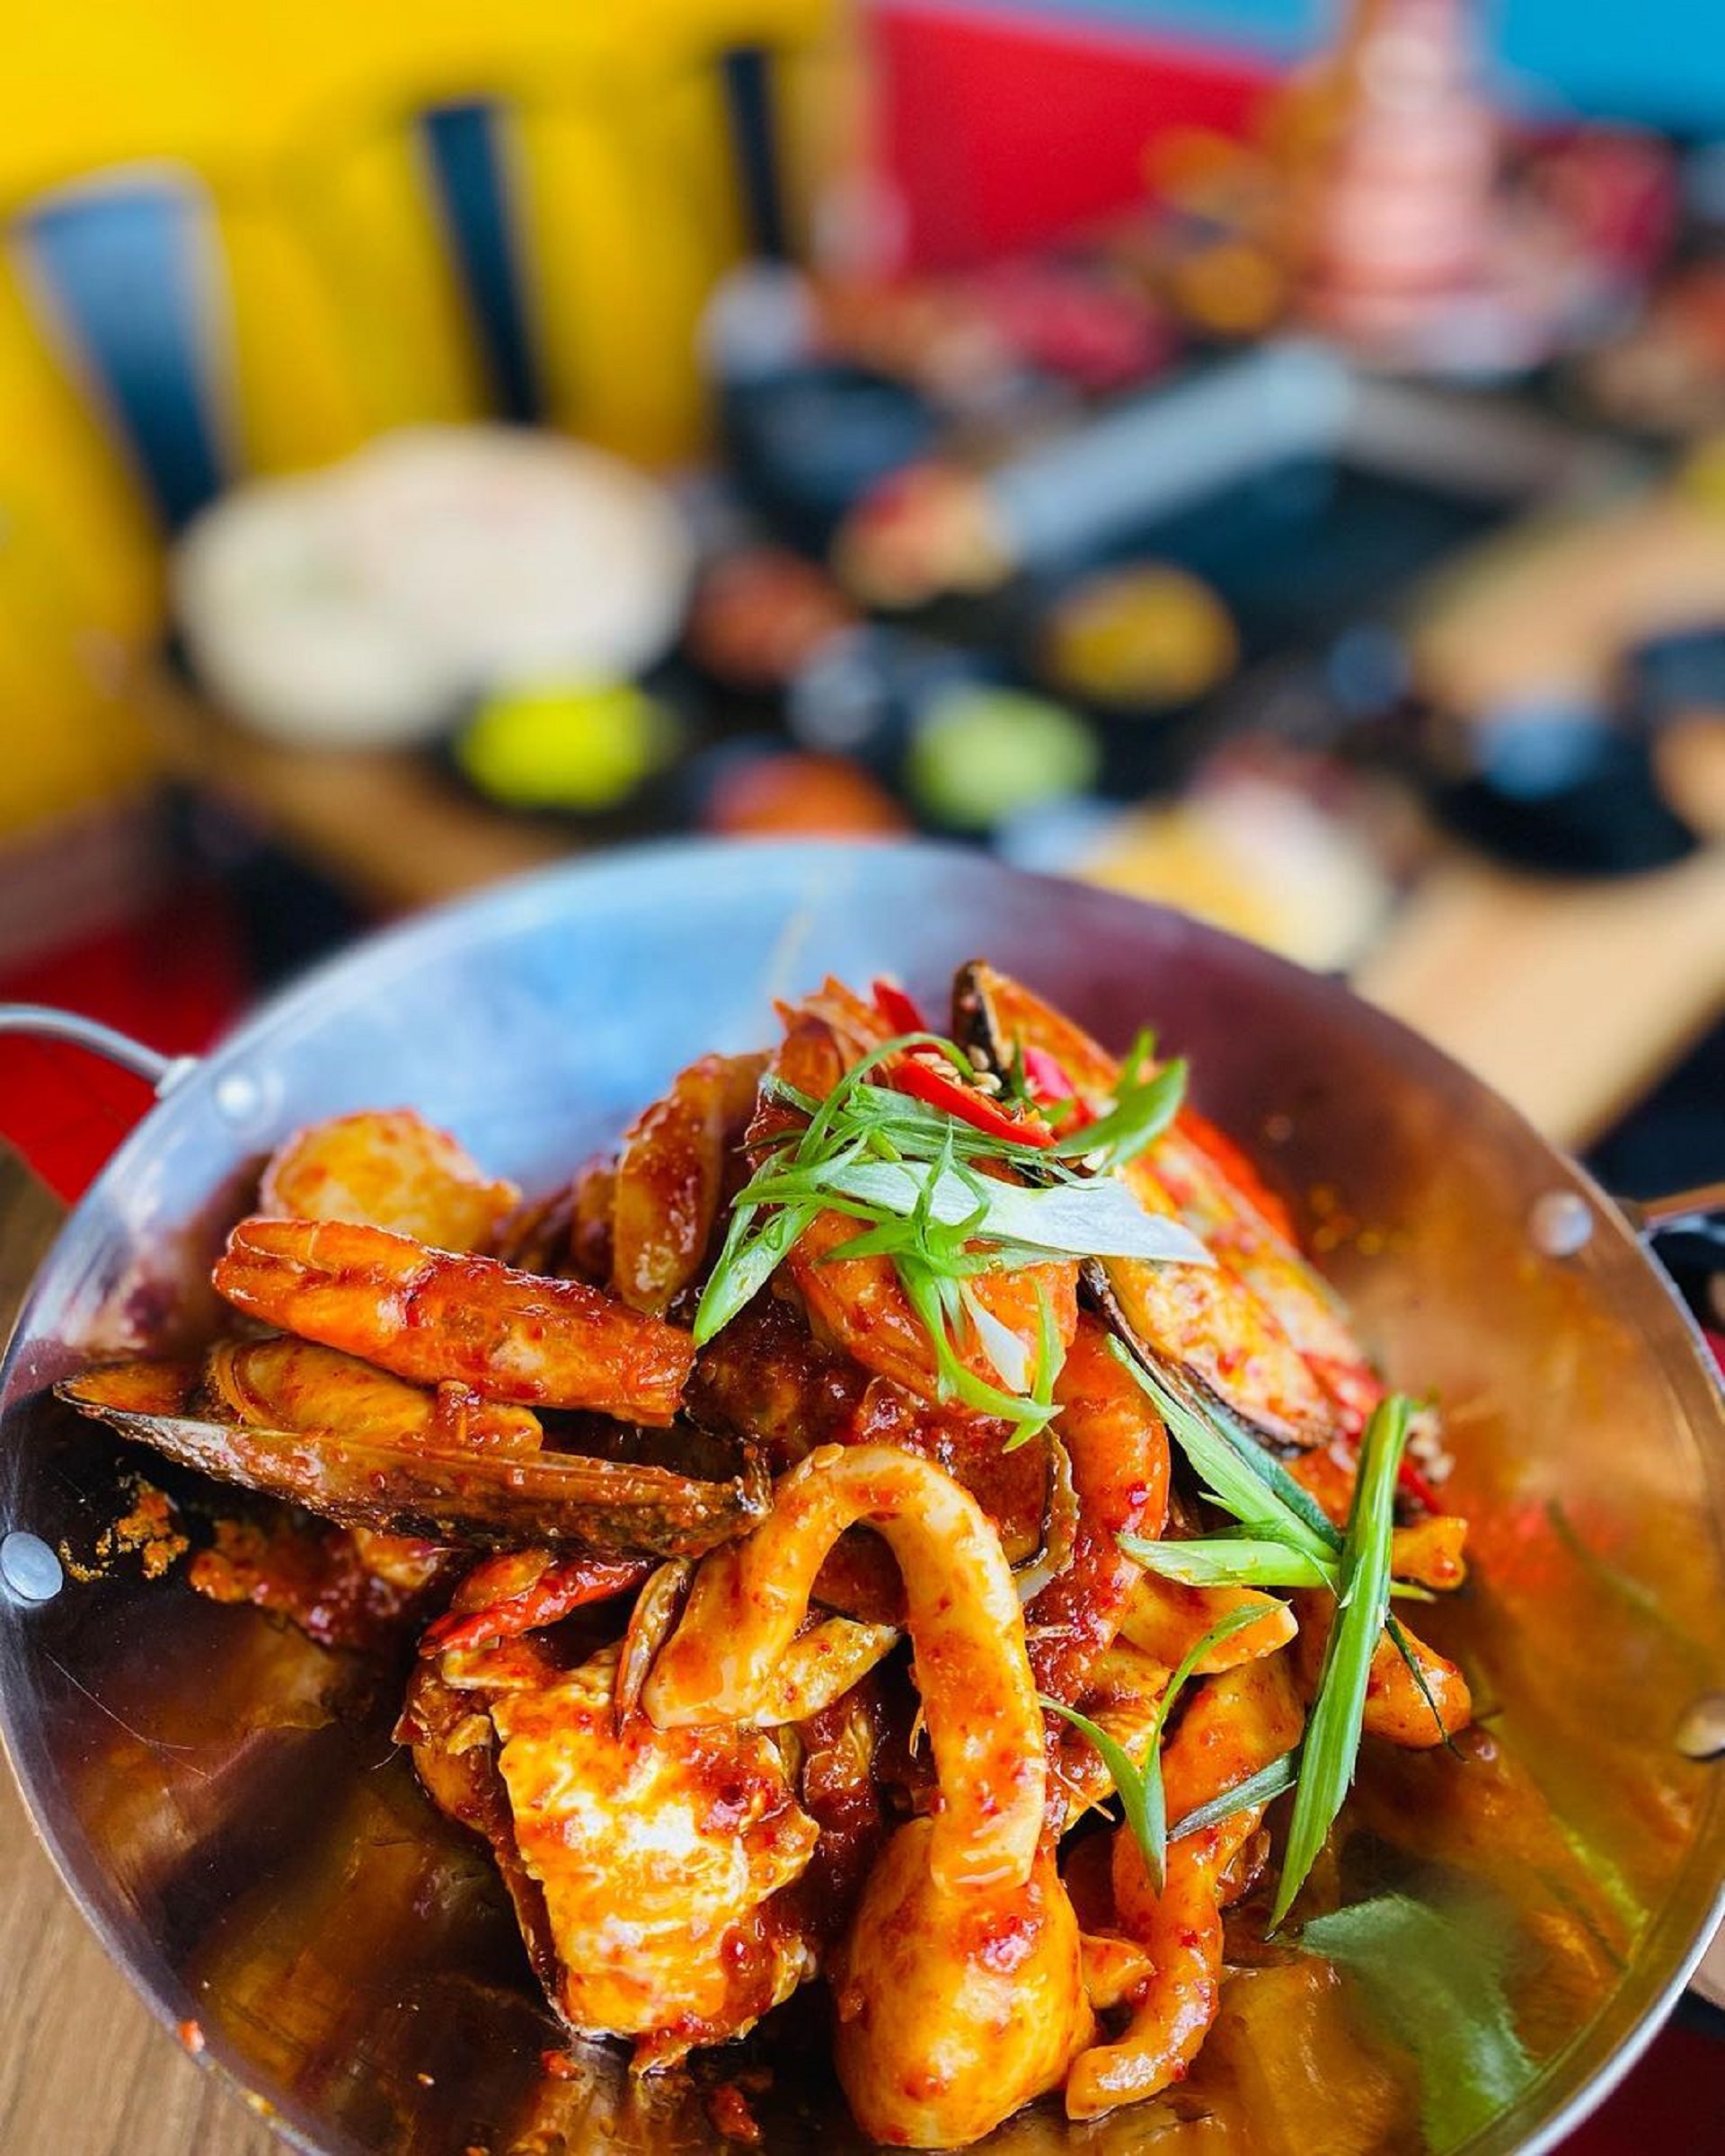 The Best Seafood in Abu Dhabi: Mukbang Shows Restaurant